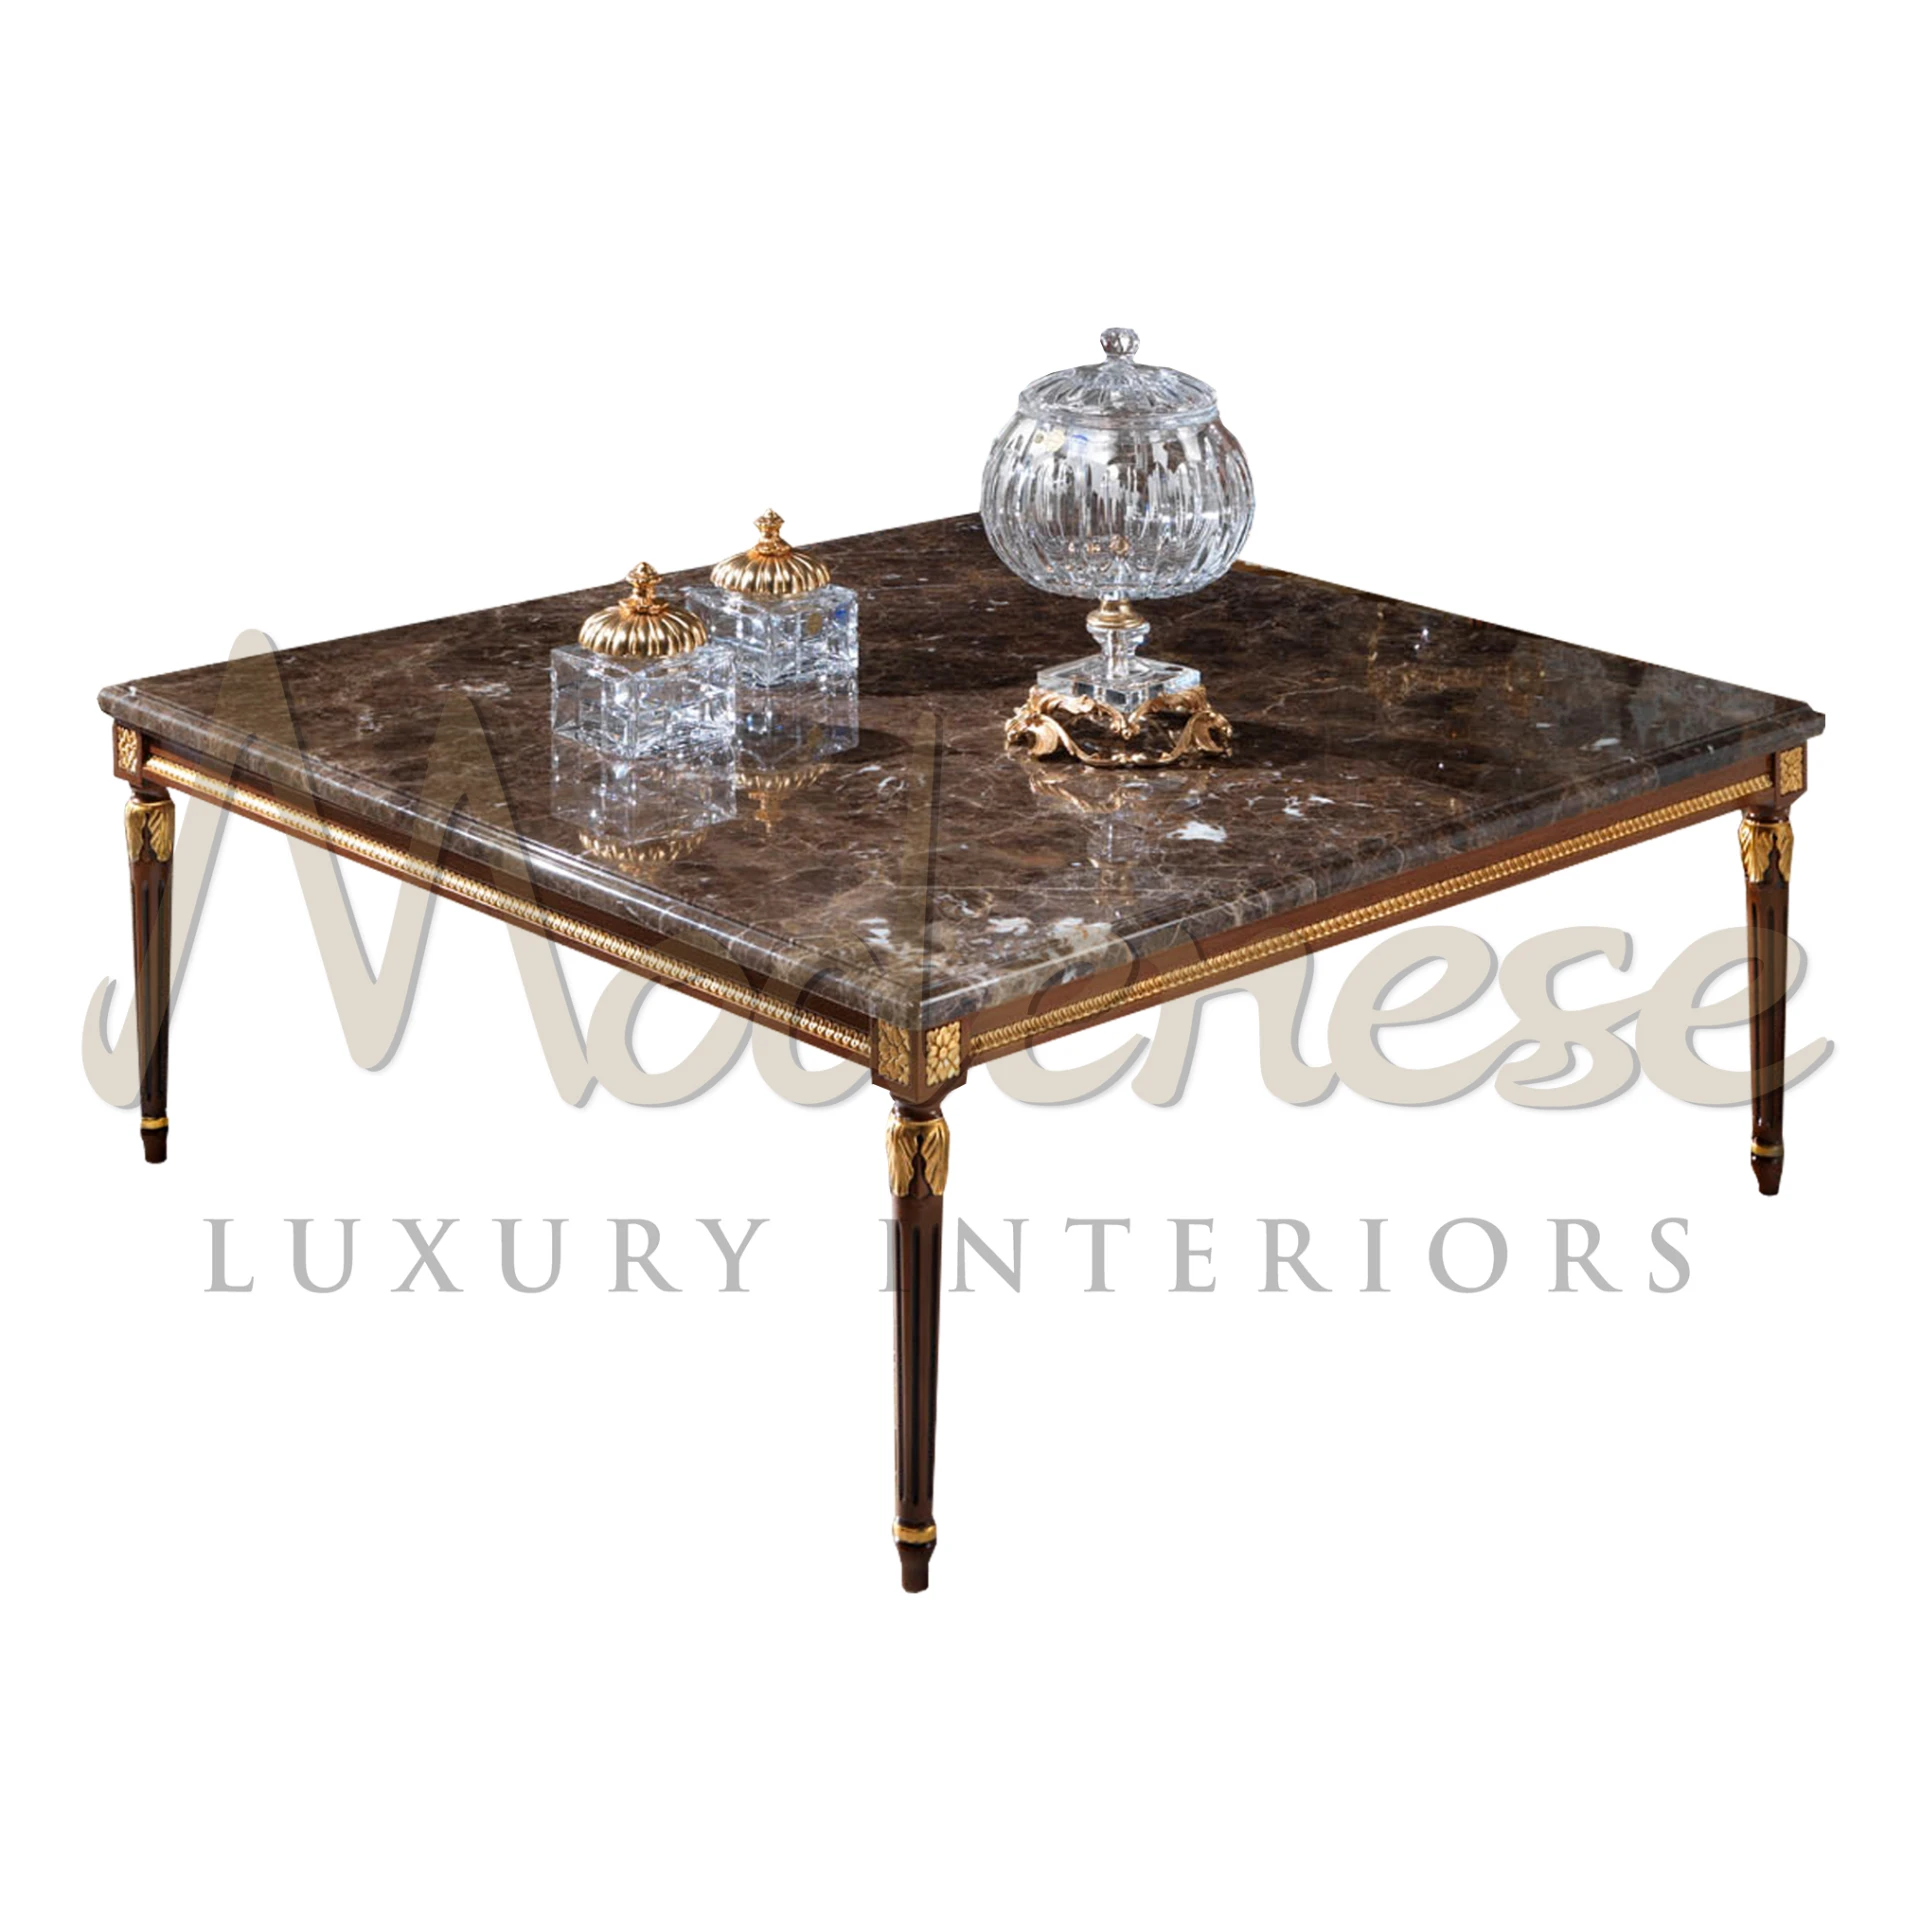 Emperador Dark Imperial Square Coffee Table, a masterpiece of opulence and elegance.